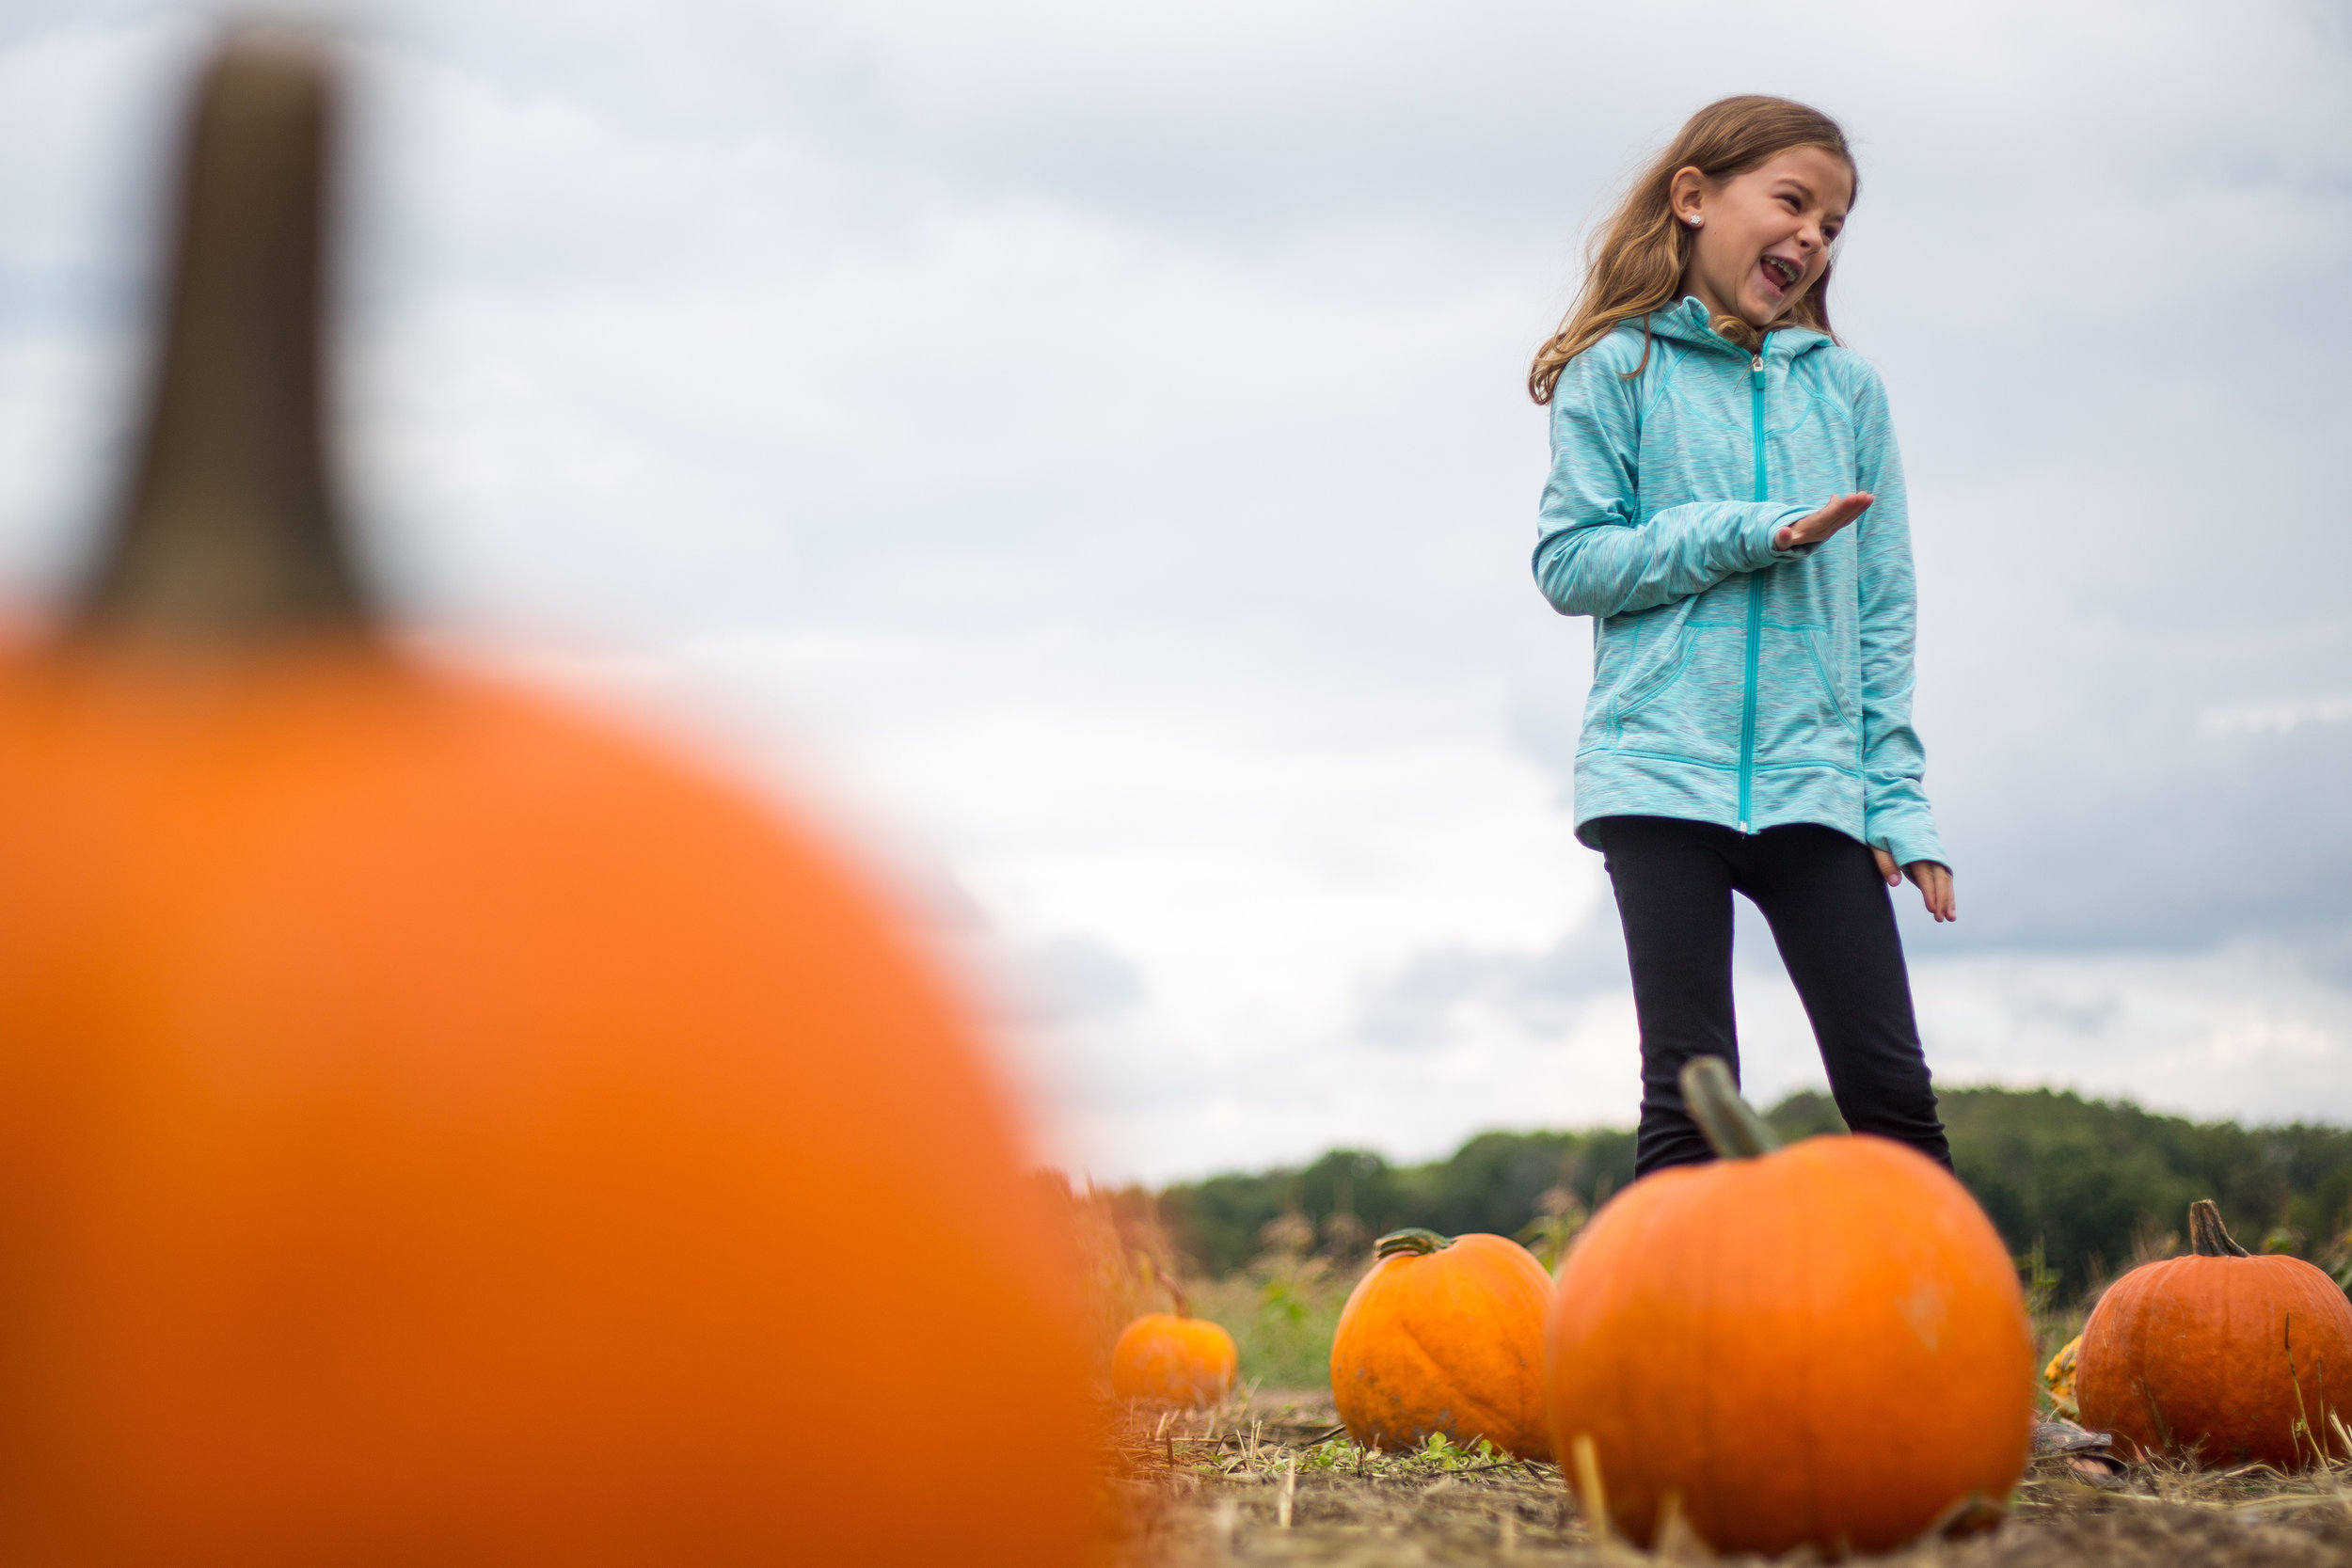  Ayla Sterner, 8, laughs as she finds the perfect pumpkin at Wise Farm in North Sweickley on Sunday afternoon.  